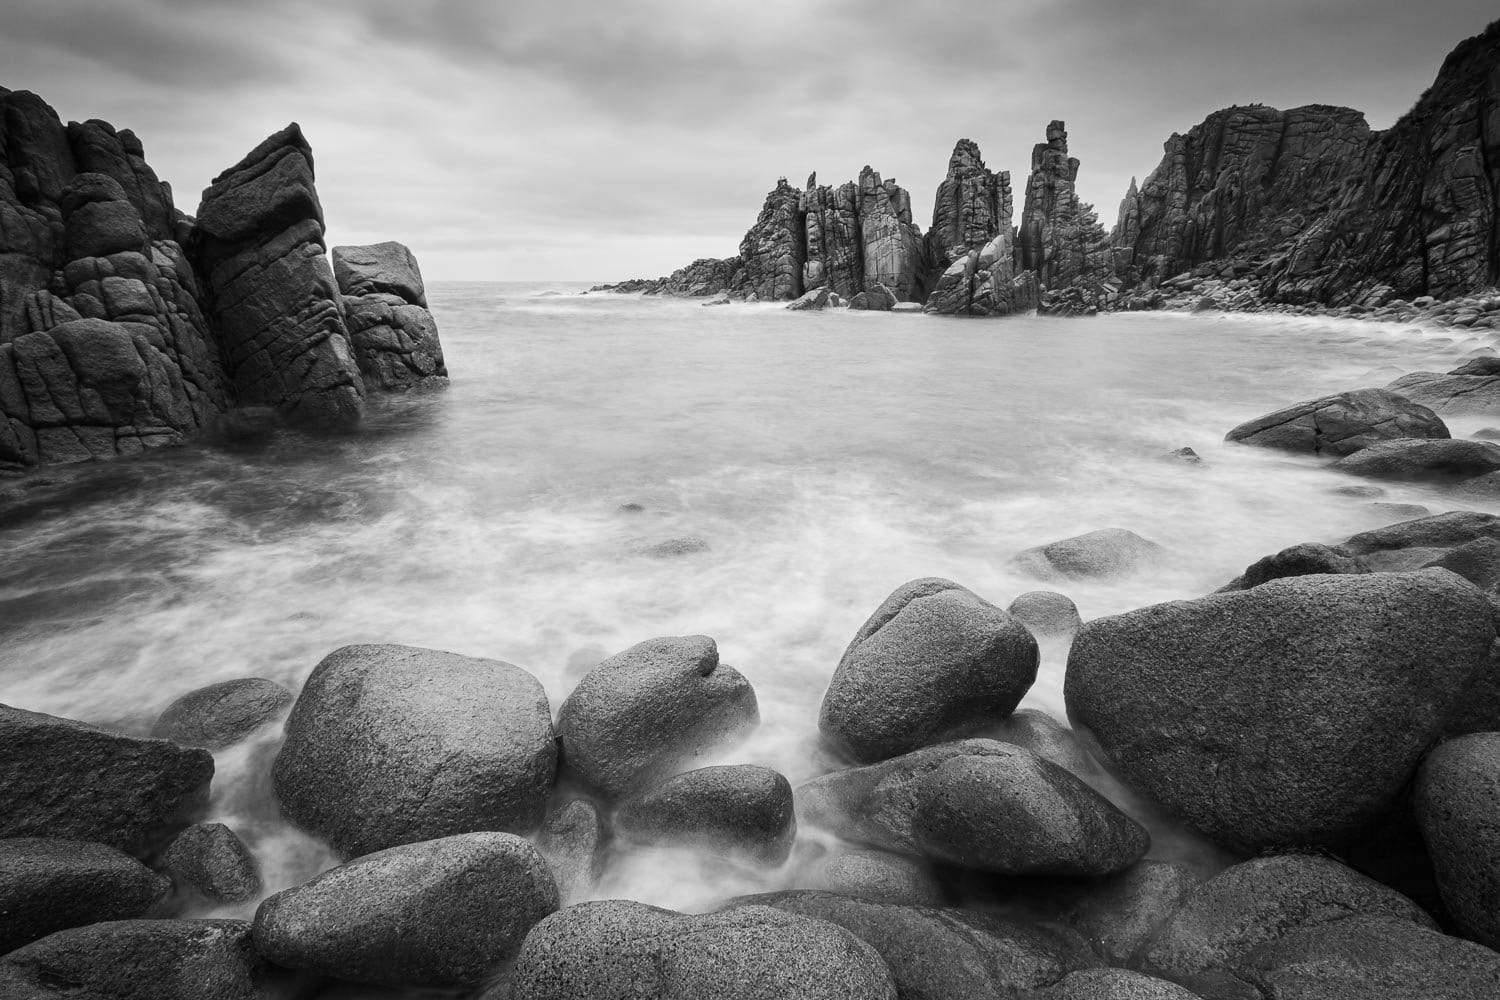 A beach with a lot of rounded stones and some standing sculpture of stones behind, The Pinnacles 3, Phillip Island